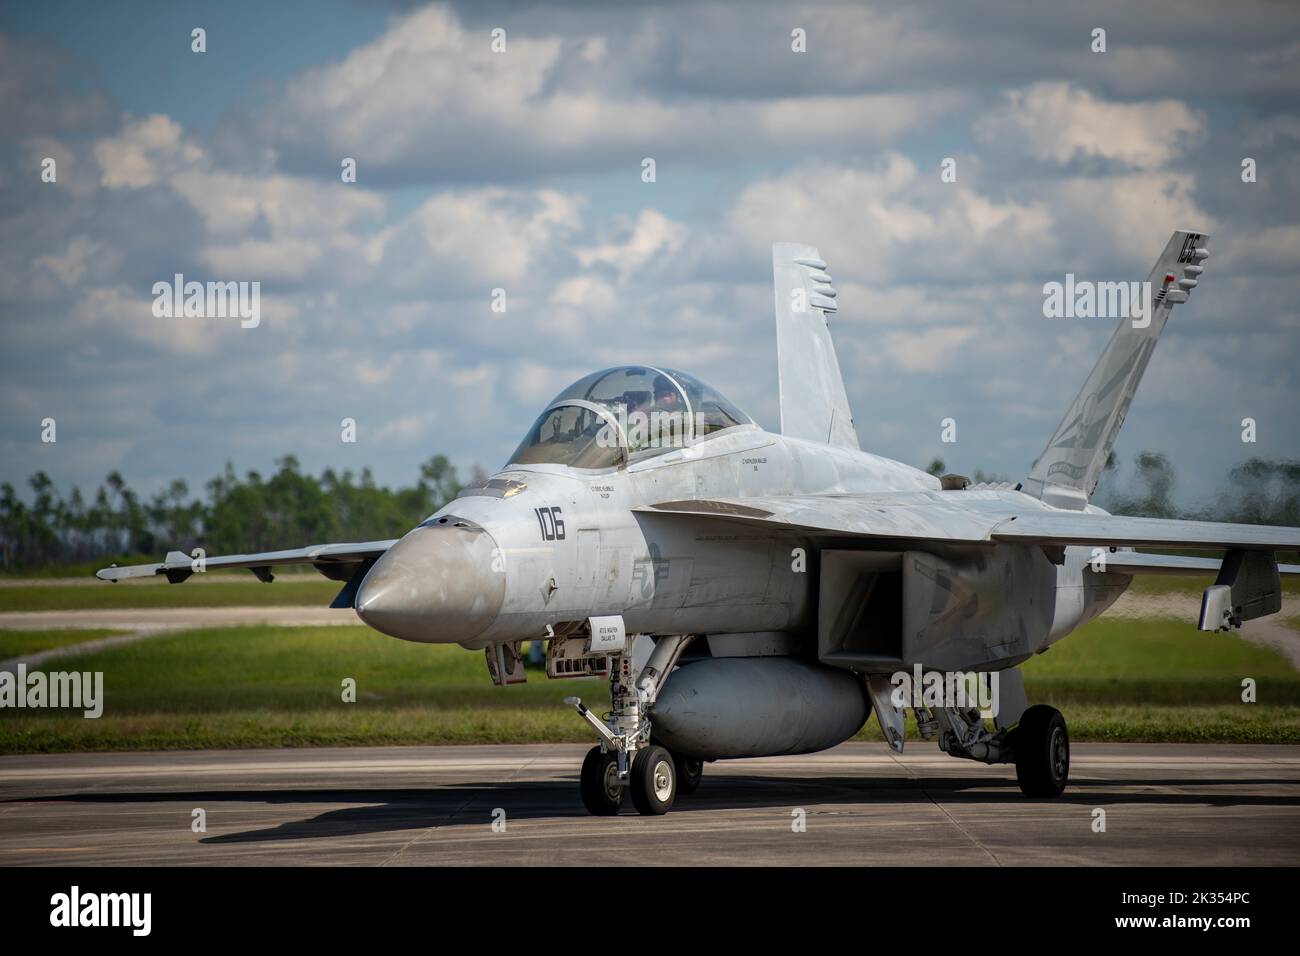 A U.S. Navy F/A-18 Super Hornet assigned to Strike Fighter Squadron (VFA) 2, Naval Air Station Lemoore, California, taxis on the flight line during Weapons System Evaluation Program-East 22.12 at Tyndall Air Force Base, Florida, Sept. 12, 2022. WSEP-E 22.12 is a formal, two-week evaluation exercise designed to test a squadron’s capabilities to conduct live-fire weapons systems during air-to-air combat training missions. (U.S. Air Force photo by Senior Airman Jacob Dastas) Stock Photo